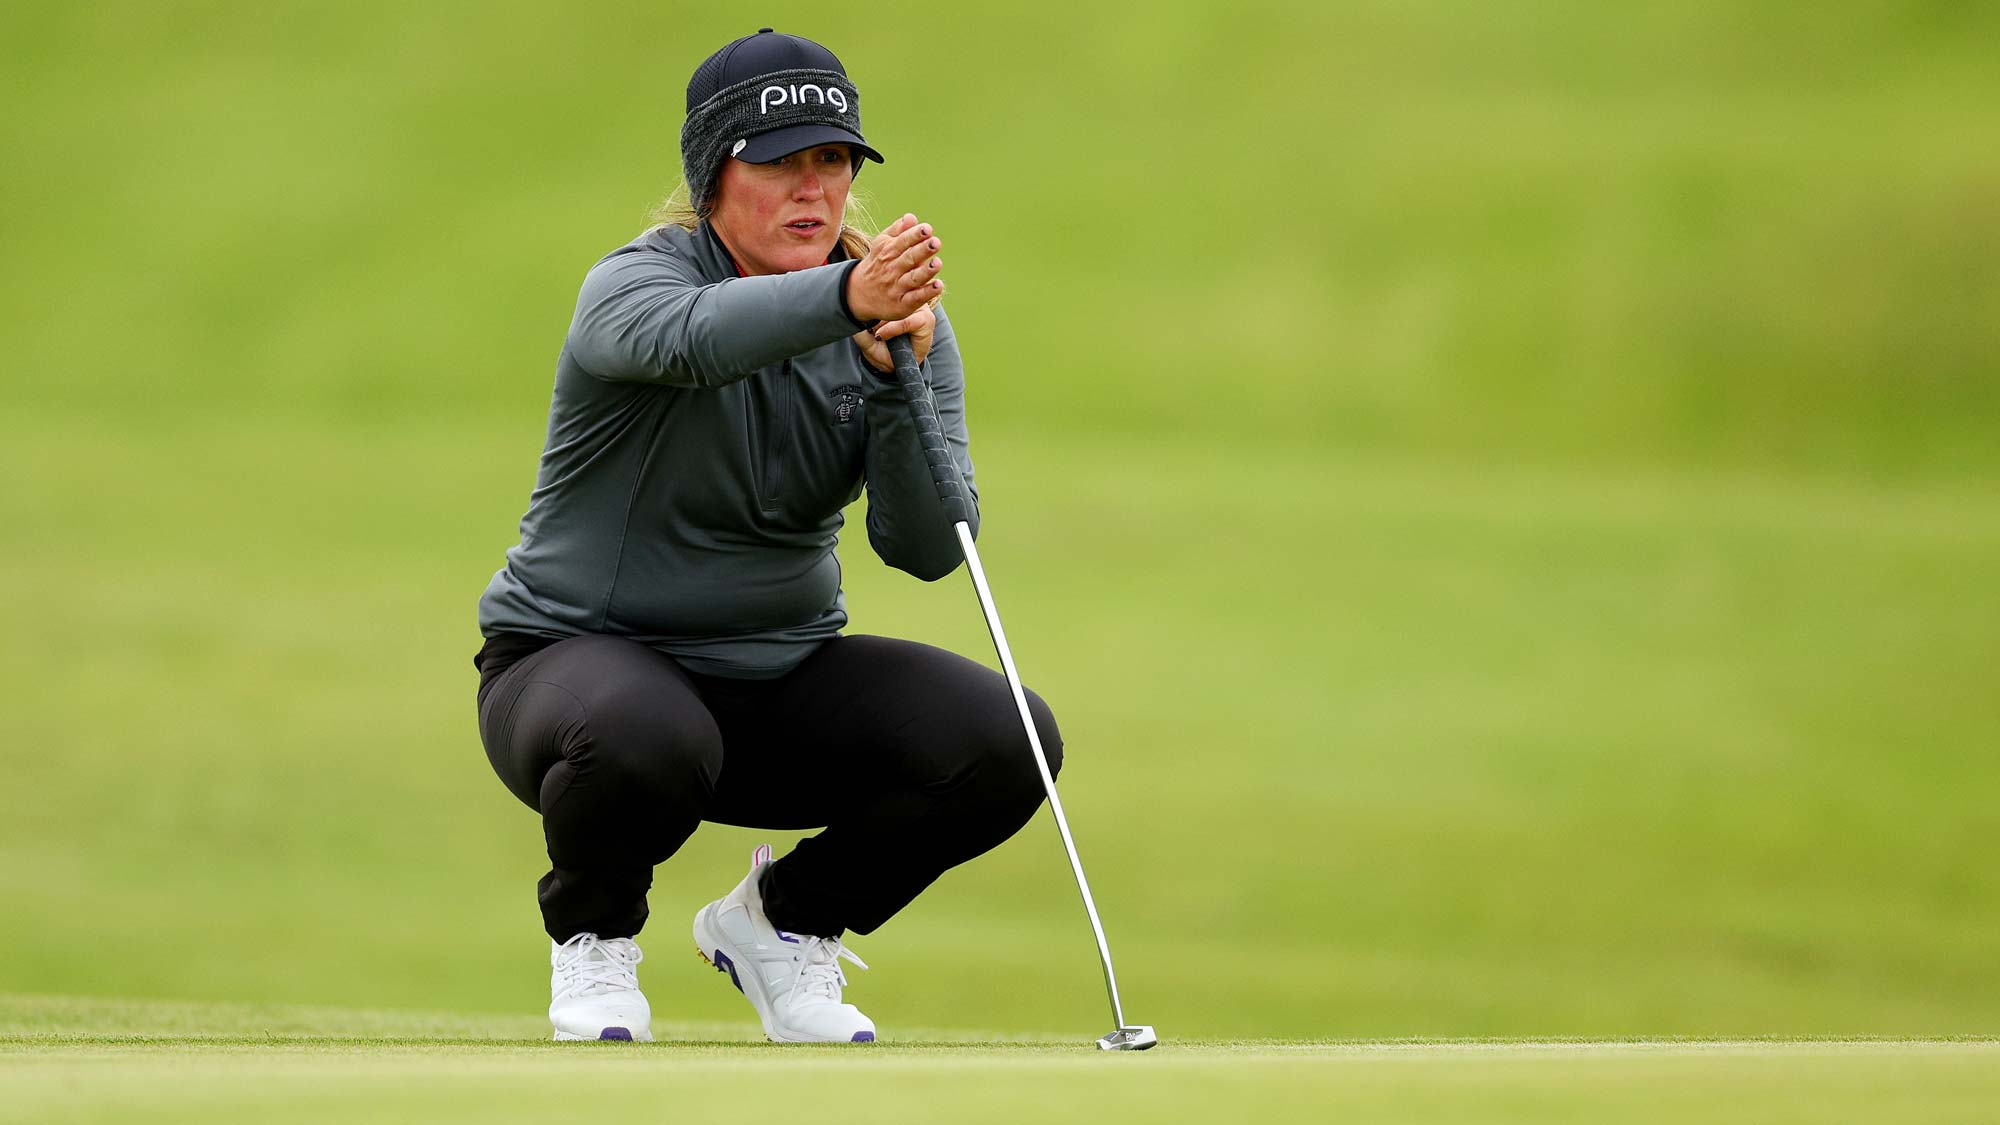 Marissa Steen of the United States prepares to putt on the 17th hole on Day Two of the ISPS HANDA World Invitational presented by AVIV Clinics at Castlerock Golf Club